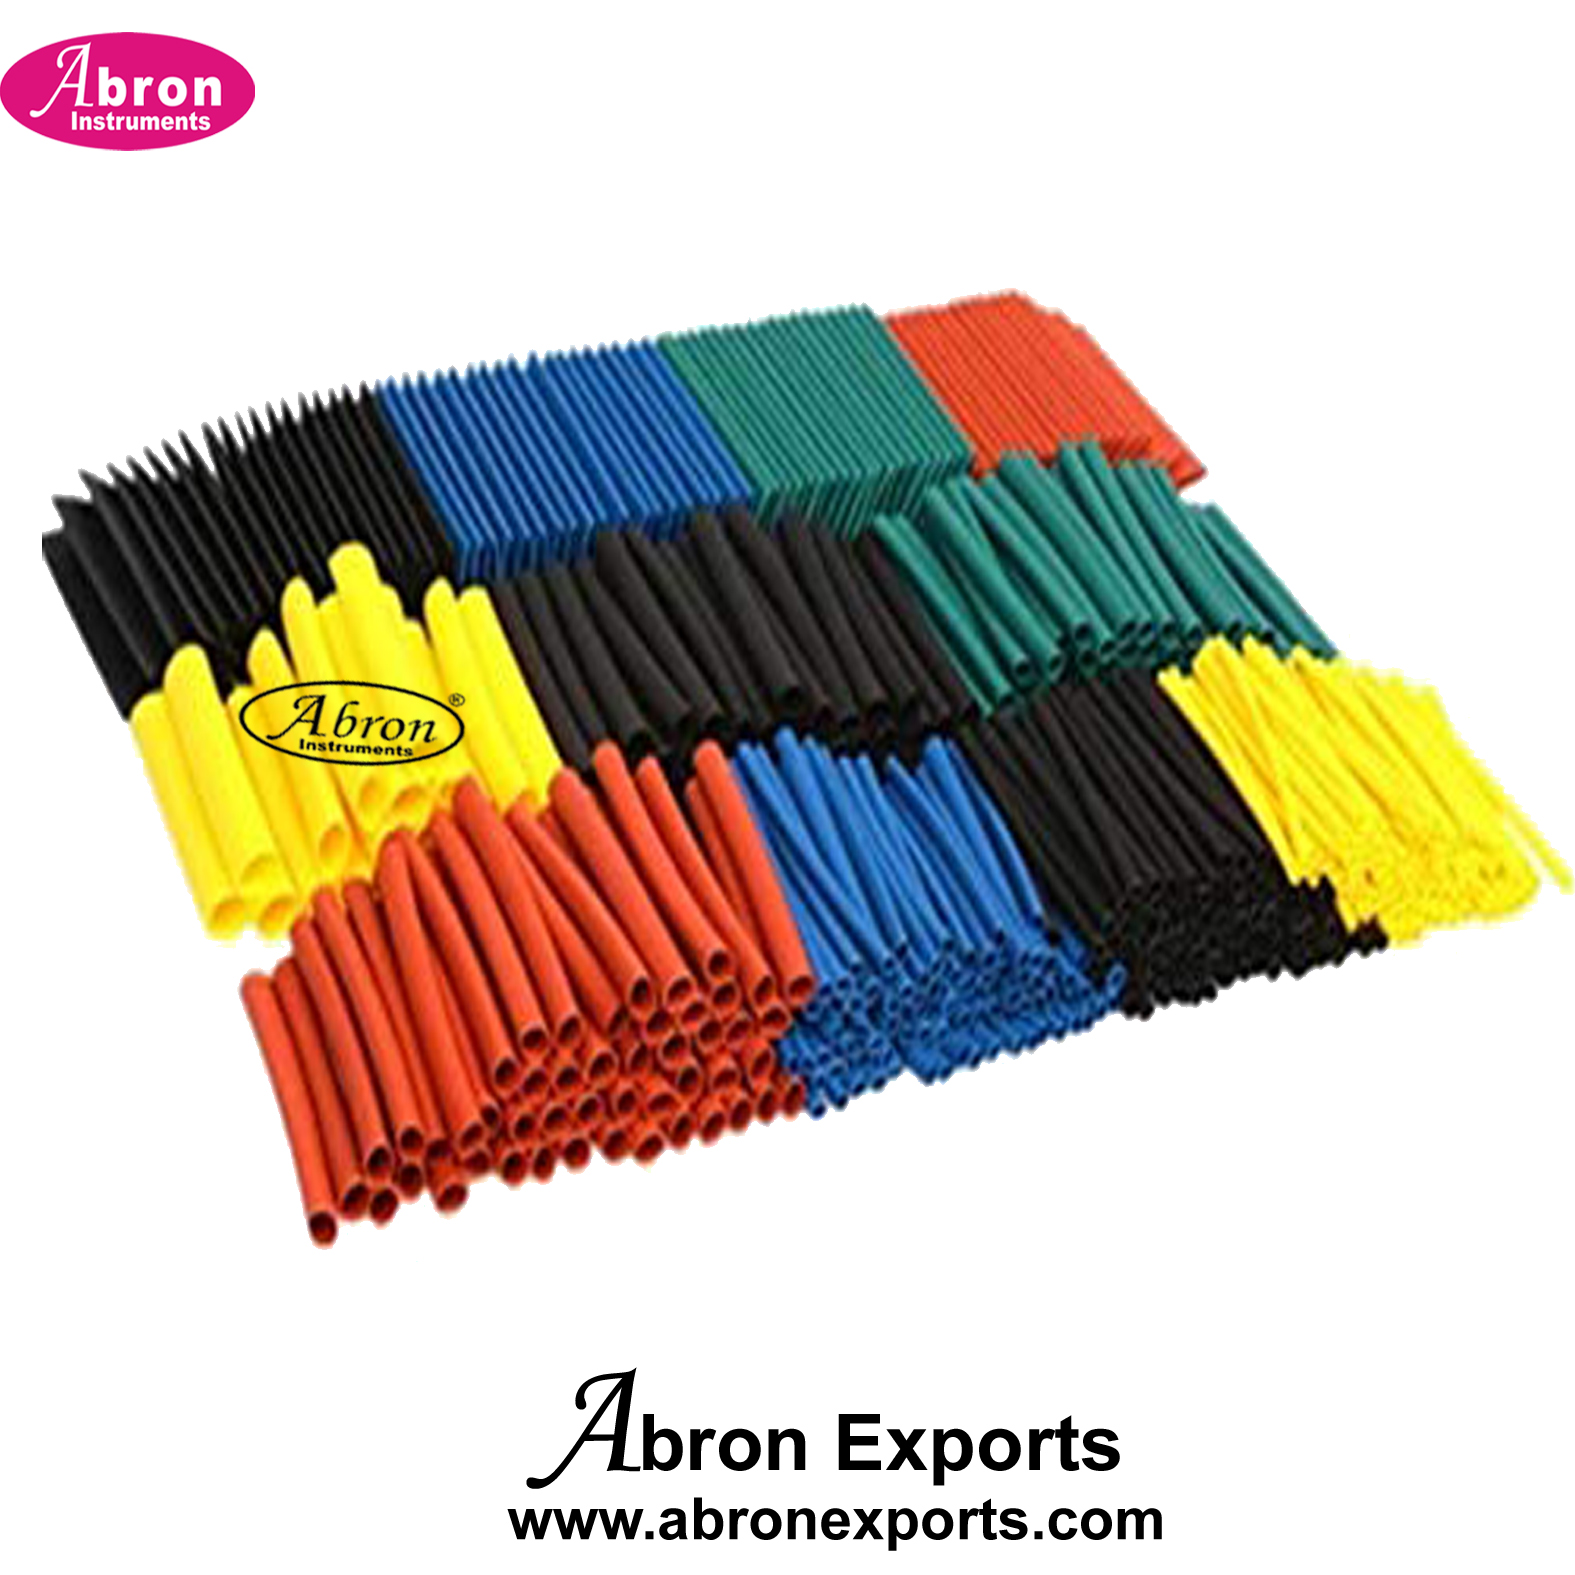 Electric Component Heat Shrinkable Tubes Box 125pc Assorted Sizes 2-10mm 45mm Long Each Abron AE-1224HS 